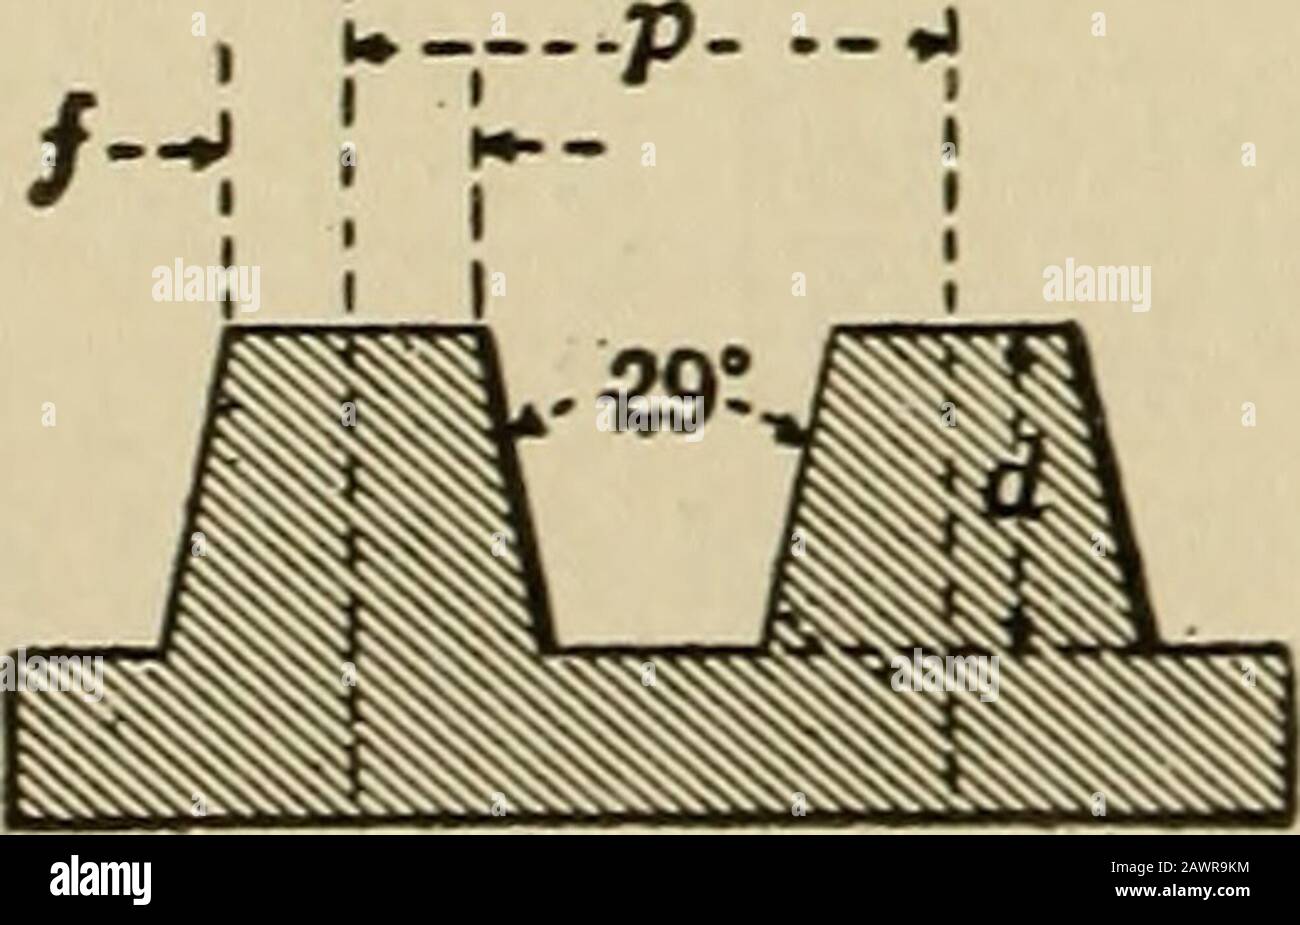 Drafting room methods . 1 J) = pitch =? Formula -! No. threads per inch(i = depth = pX. 04033b = radius = J) X. 1373 Acme Standard Screw Thread. Formula p = pitch = 1 No. threads per inchd = depth = 3^p+.010b = flat on top of thread = pX.3707 WASHERS 115 Cast Washers Government (O. G.) Standard Diameter^Inches HoleInches ThicknessInches BoltInches WeightPounds ^2K ^ 11 16 Yi y2 2M M H Vs % . 3 K 16 Ya Va 3H 1 Vs % 134 4 1^ 15 1 fi 1 m 43^ m 1 1)^ 2K 5 m m m 8 6 m 13^ W2 5 Standard Wrought Washers U. S. Standard Sizes In effect January 20. 1910 DiameterInches HoleInches Thickjiess ofWire Gauge( Stock Photo